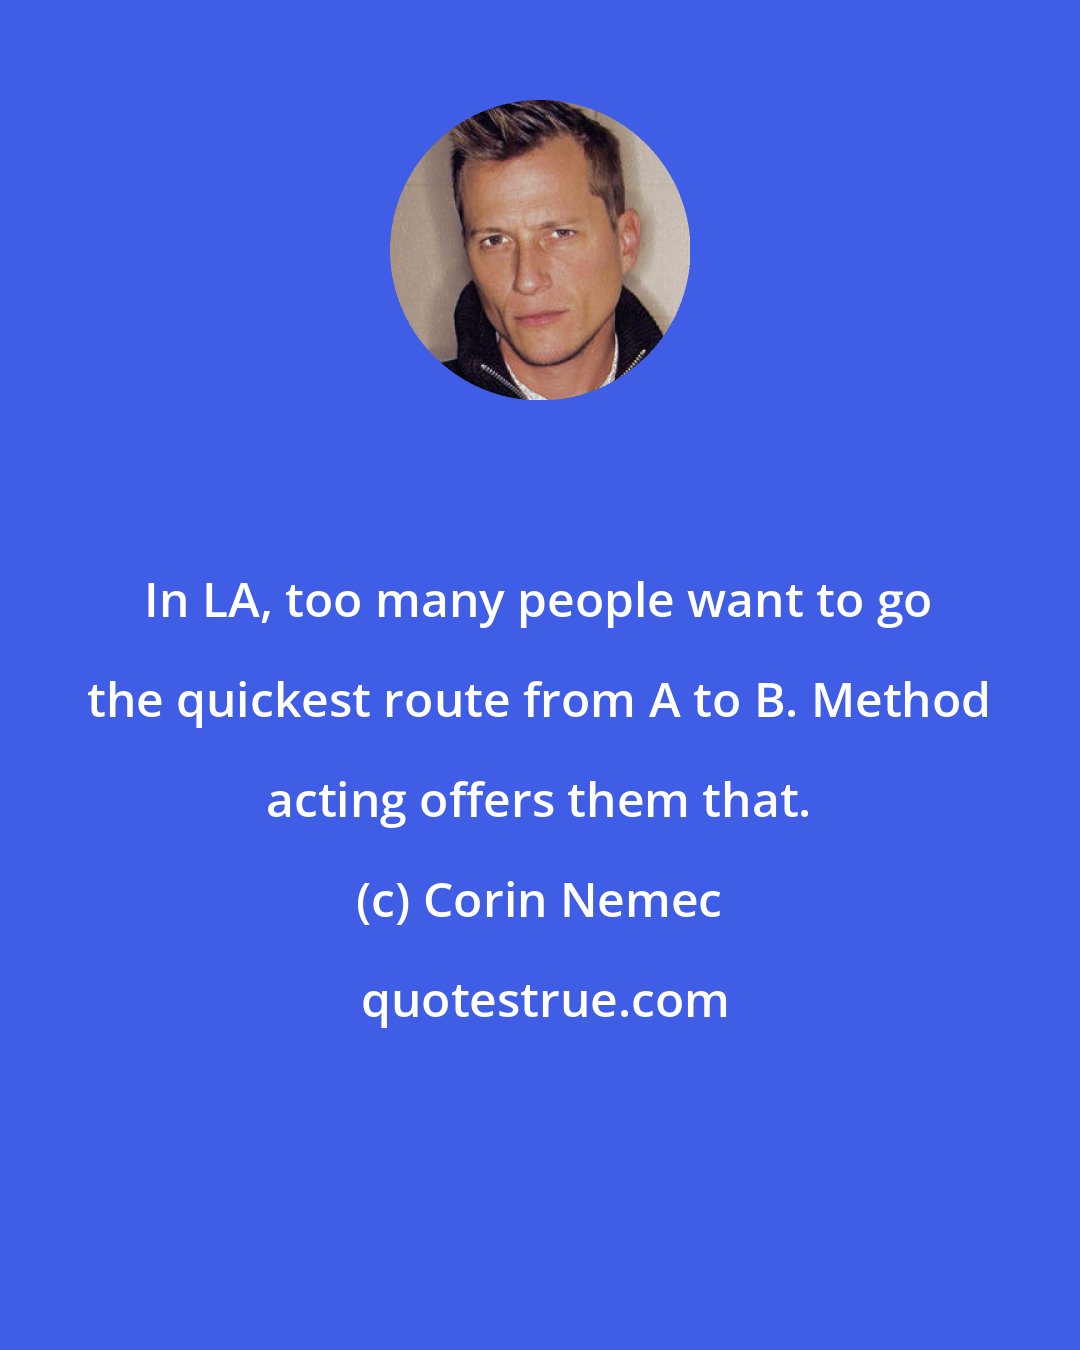 Corin Nemec: In LA, too many people want to go the quickest route from A to B. Method acting offers them that.